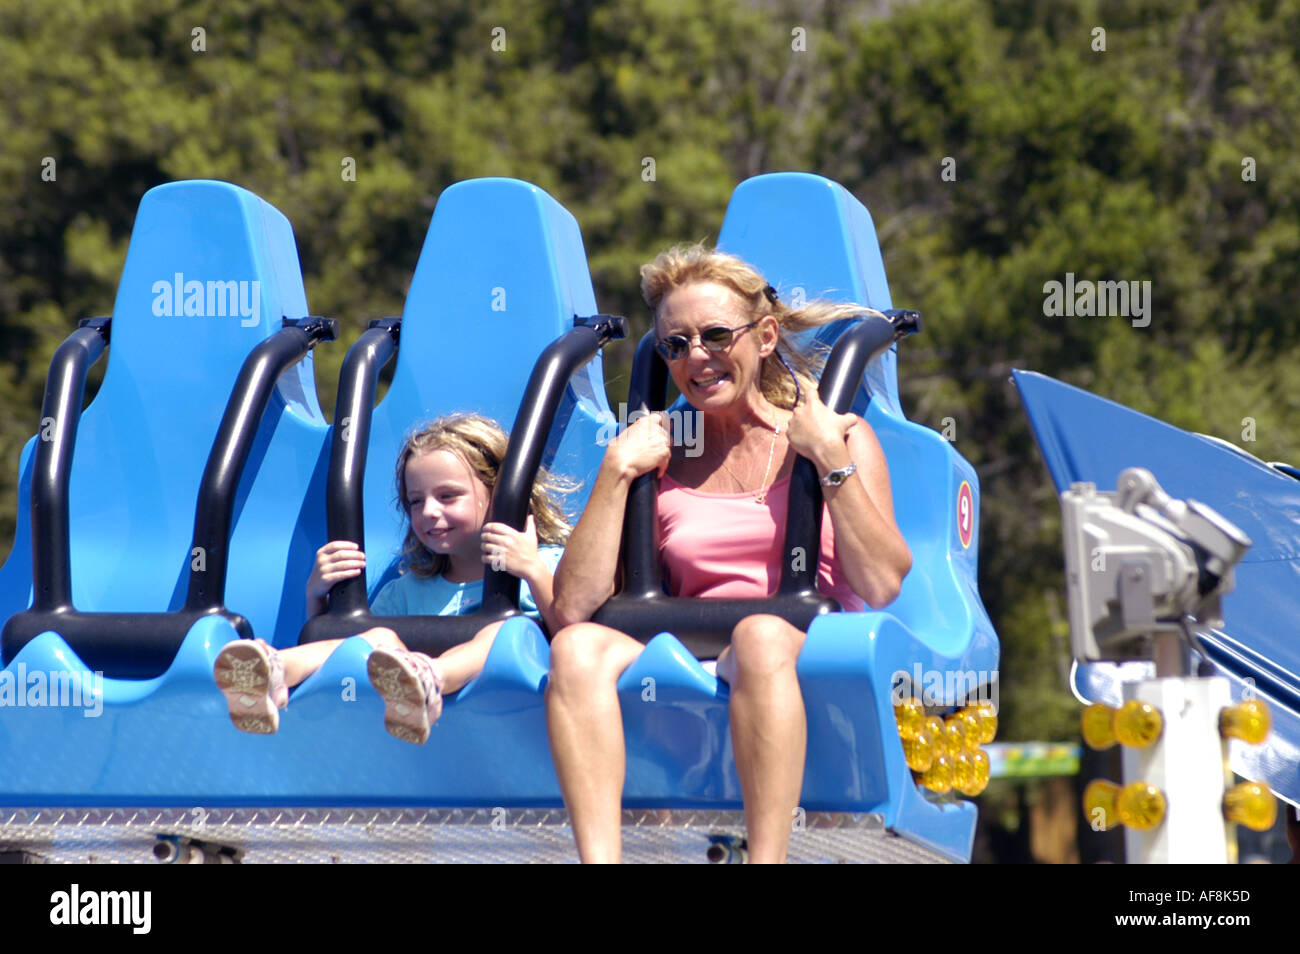 Cypress Gardens Adventure Park Florida Fl Winter Haven Florida attractions mother and daughter on colorful thrill ride Stock Photo